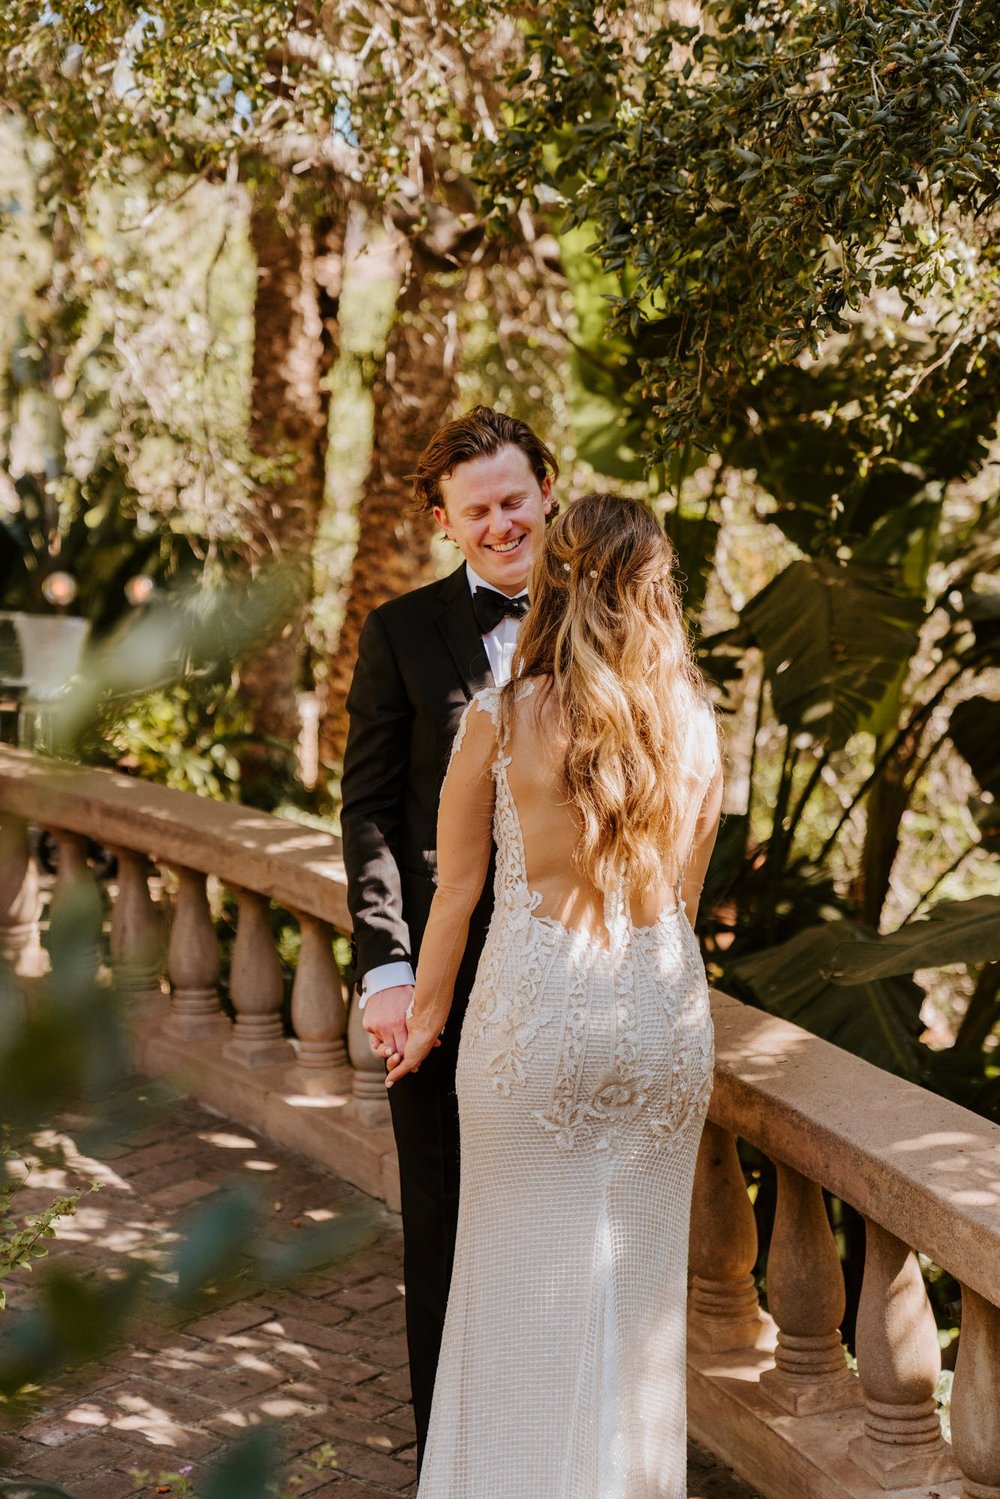 First look with bride and groom at The Houdini Estate wedding in los angeles, ca, photography by Tida Svy